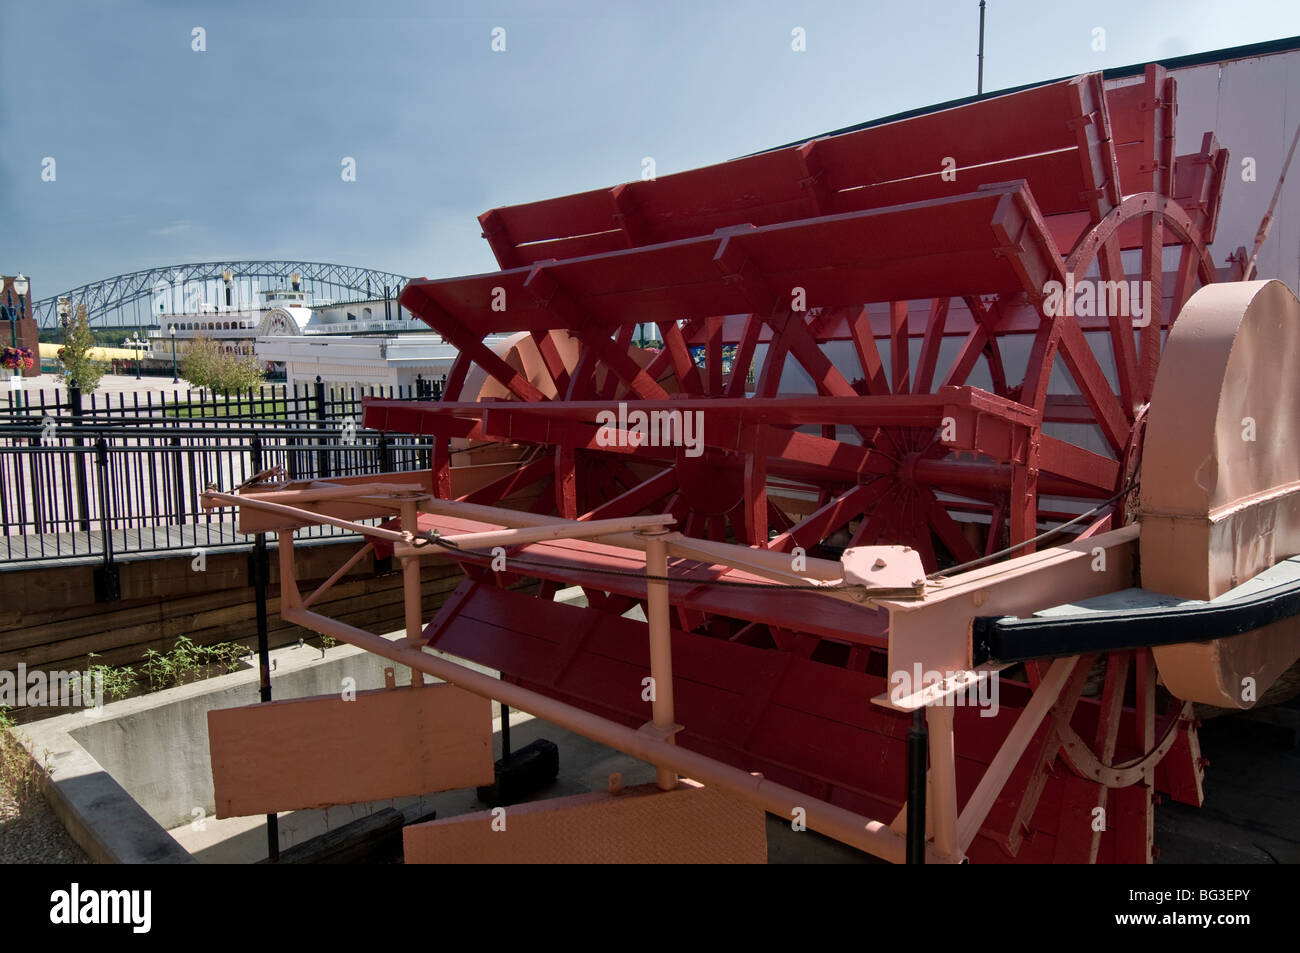 Paddlewheel on boat at The National Mississippi River Museum and Aquarium in Dubuque, Iowa Stock Photo